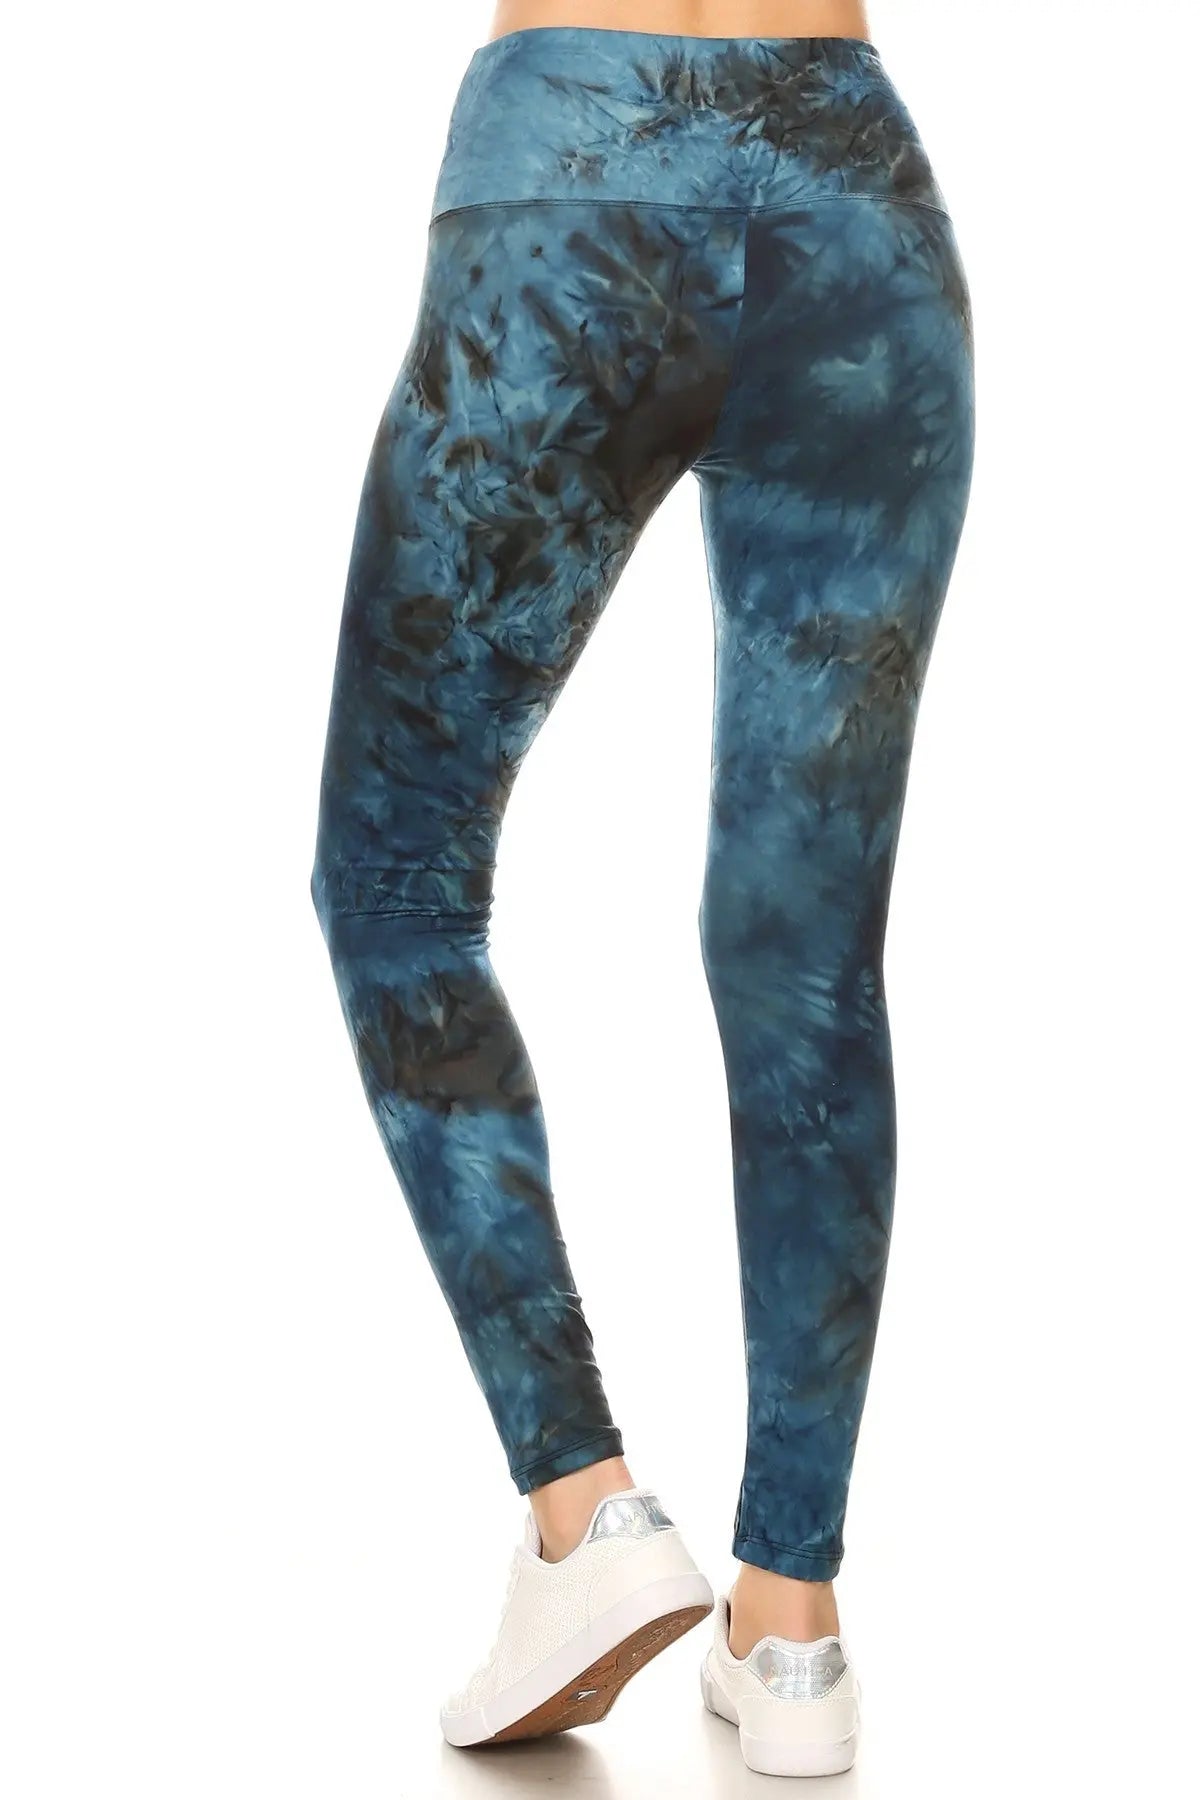 5-inch Long Yoga Style Banded Lined Tie Dye Printed Knit Legging With High Waist Sunny EvE Fashion